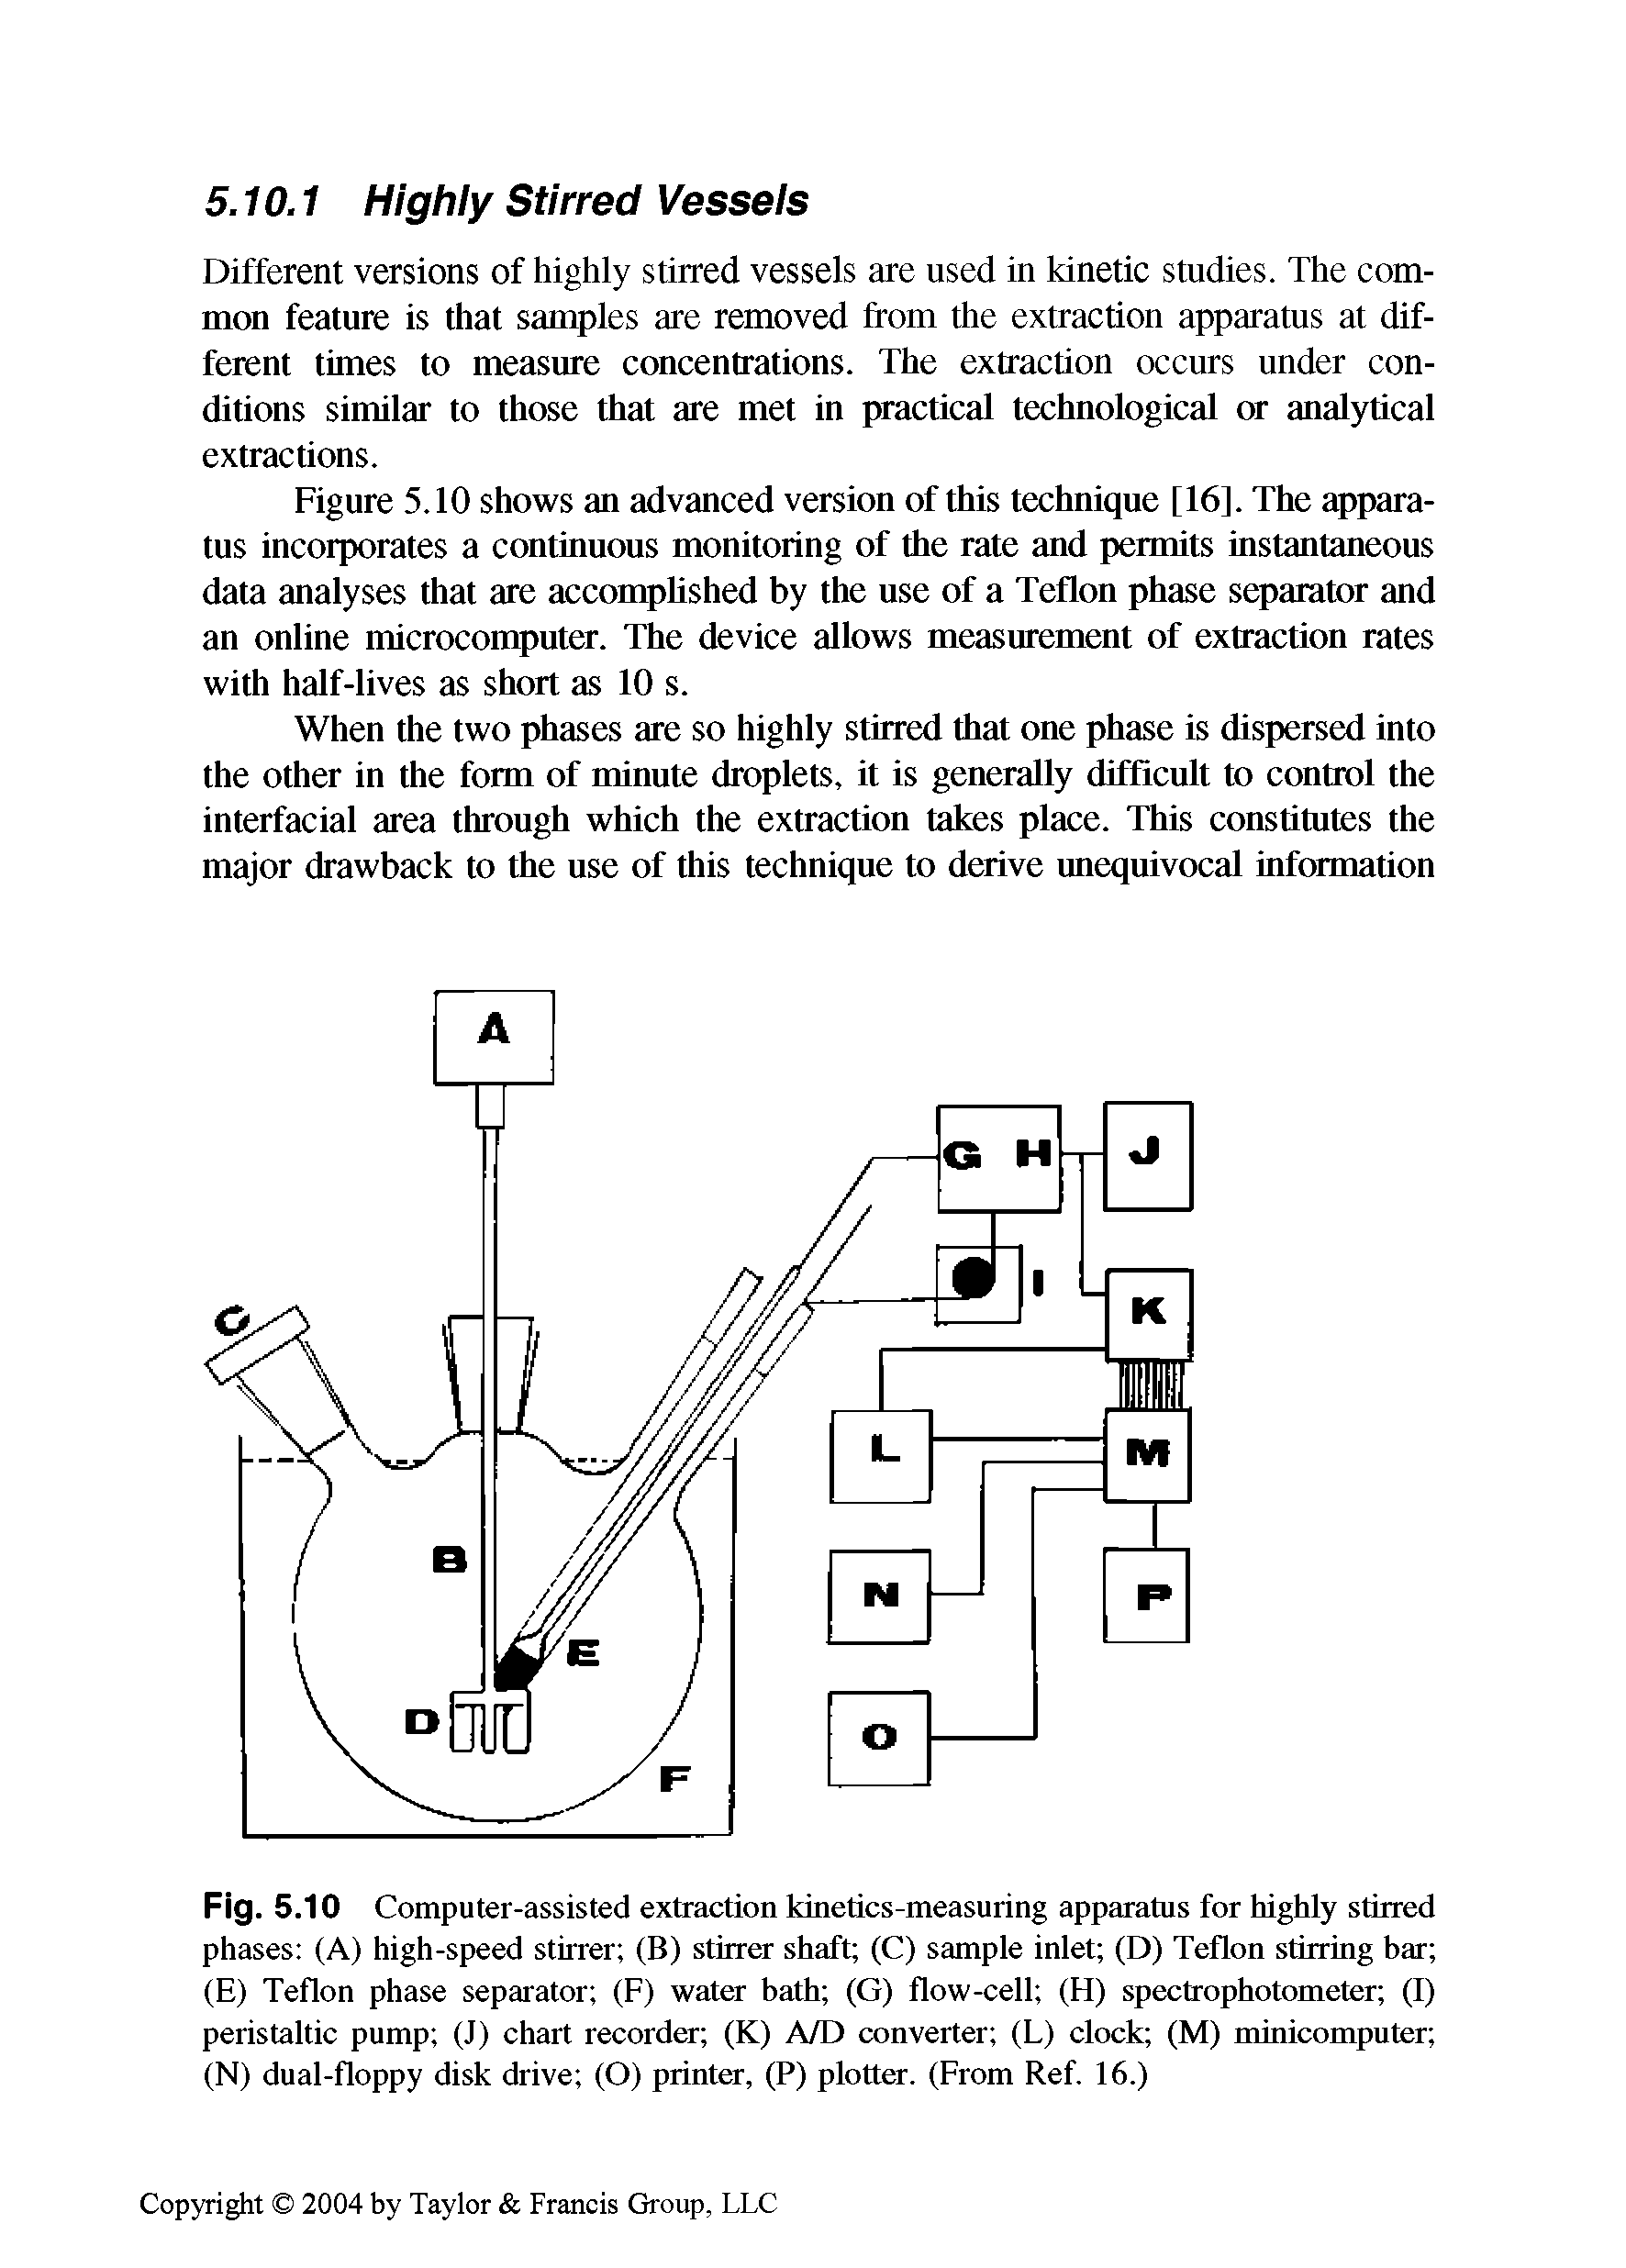 Fig. 5.10 Computer-assisted extraction kinetics-measuring apparatus for highly stirred phases (A) high-speed stirrer (B) stirrer shaft (C) sample inlet (D) Teflon stirring har (E) Teflon phase separator (F) water hath (G) flow-cell (H) spectrophotometer (I) peristaltic pump (J) chart recorder (K) A/D converter (L) clock (M) minicomputer (N) dual-floppy disk drive (O) printer, (P) plotter. (From Ref. 16.)...